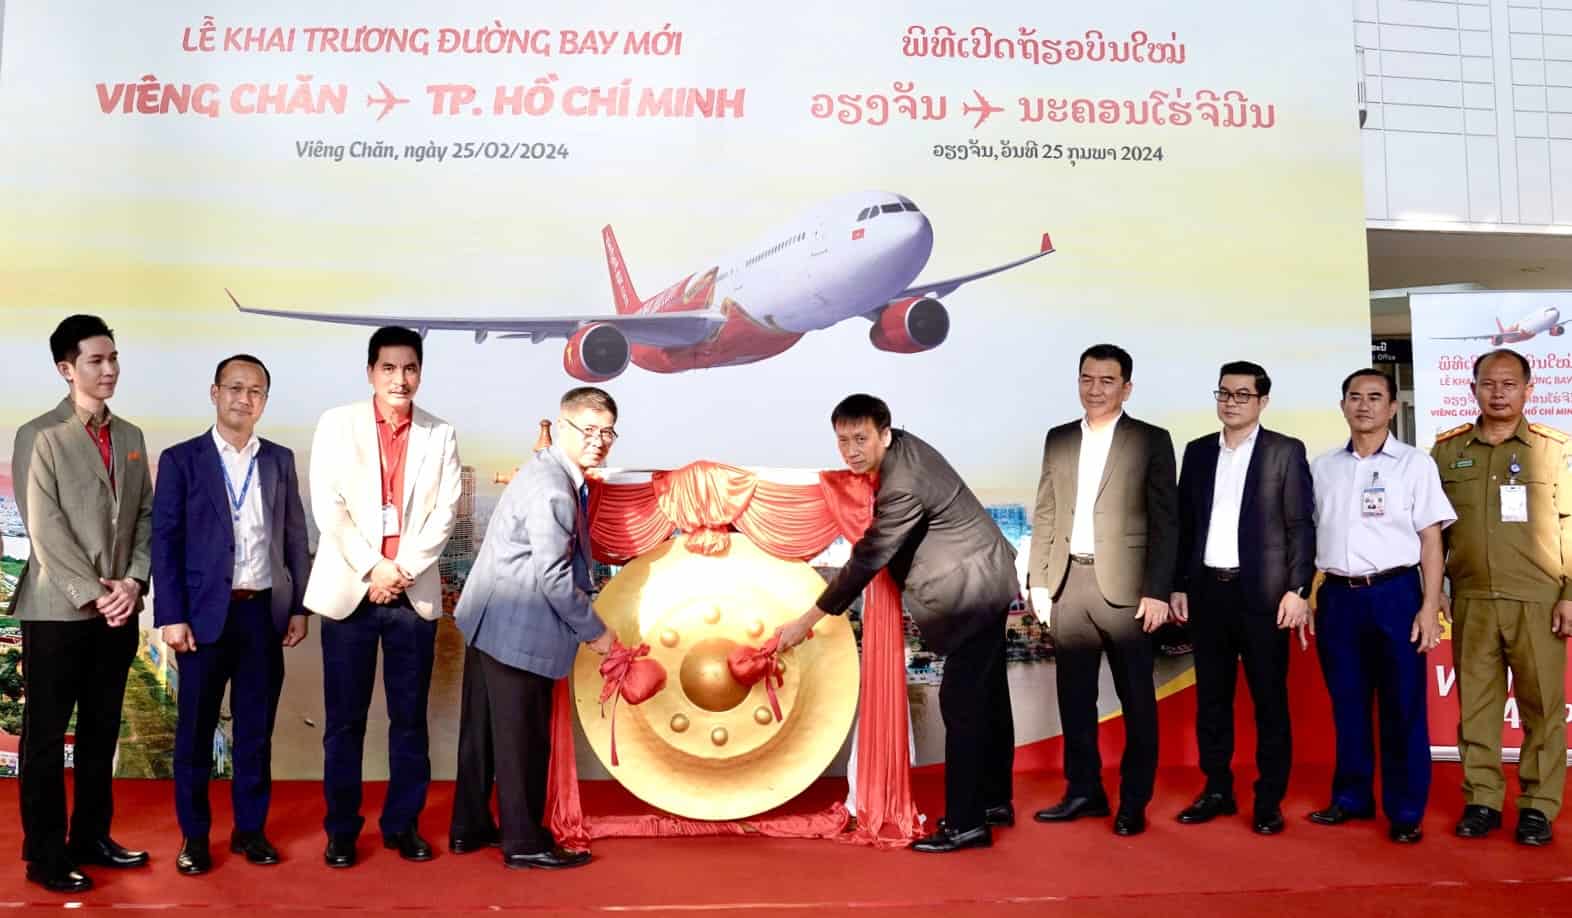 Vietjet launches first direct service between Ho Chi Minh City and Vientiane